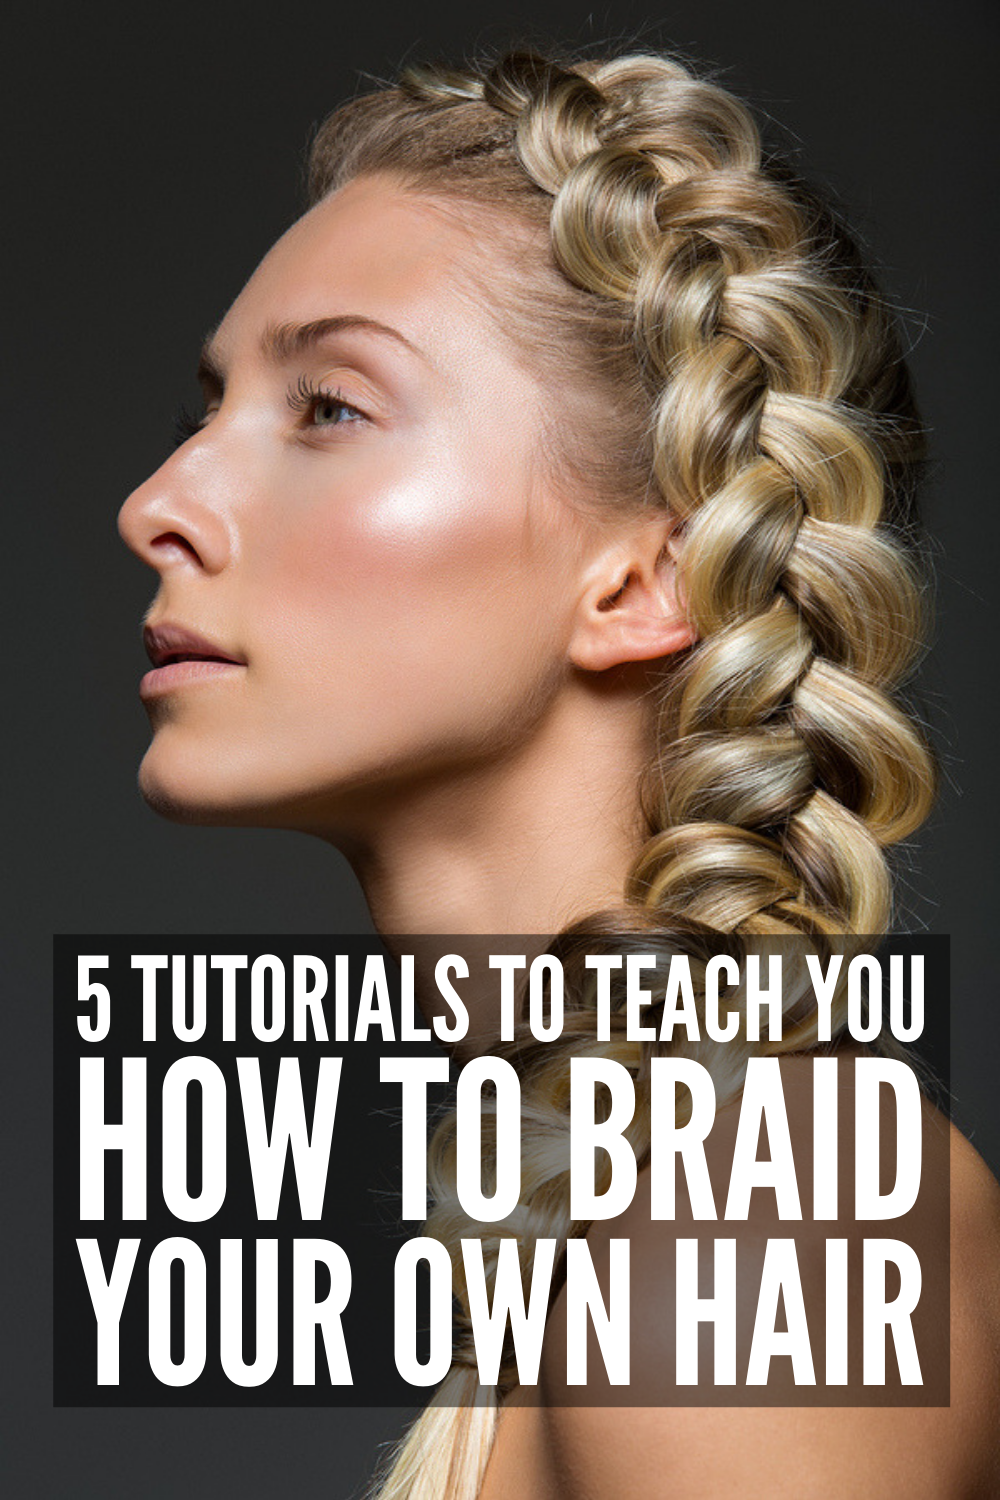 How to Braid Your Own Hair: 5 Step-by-Step Tutorials for Beginners -   9 hairstyles Long step by step ideas